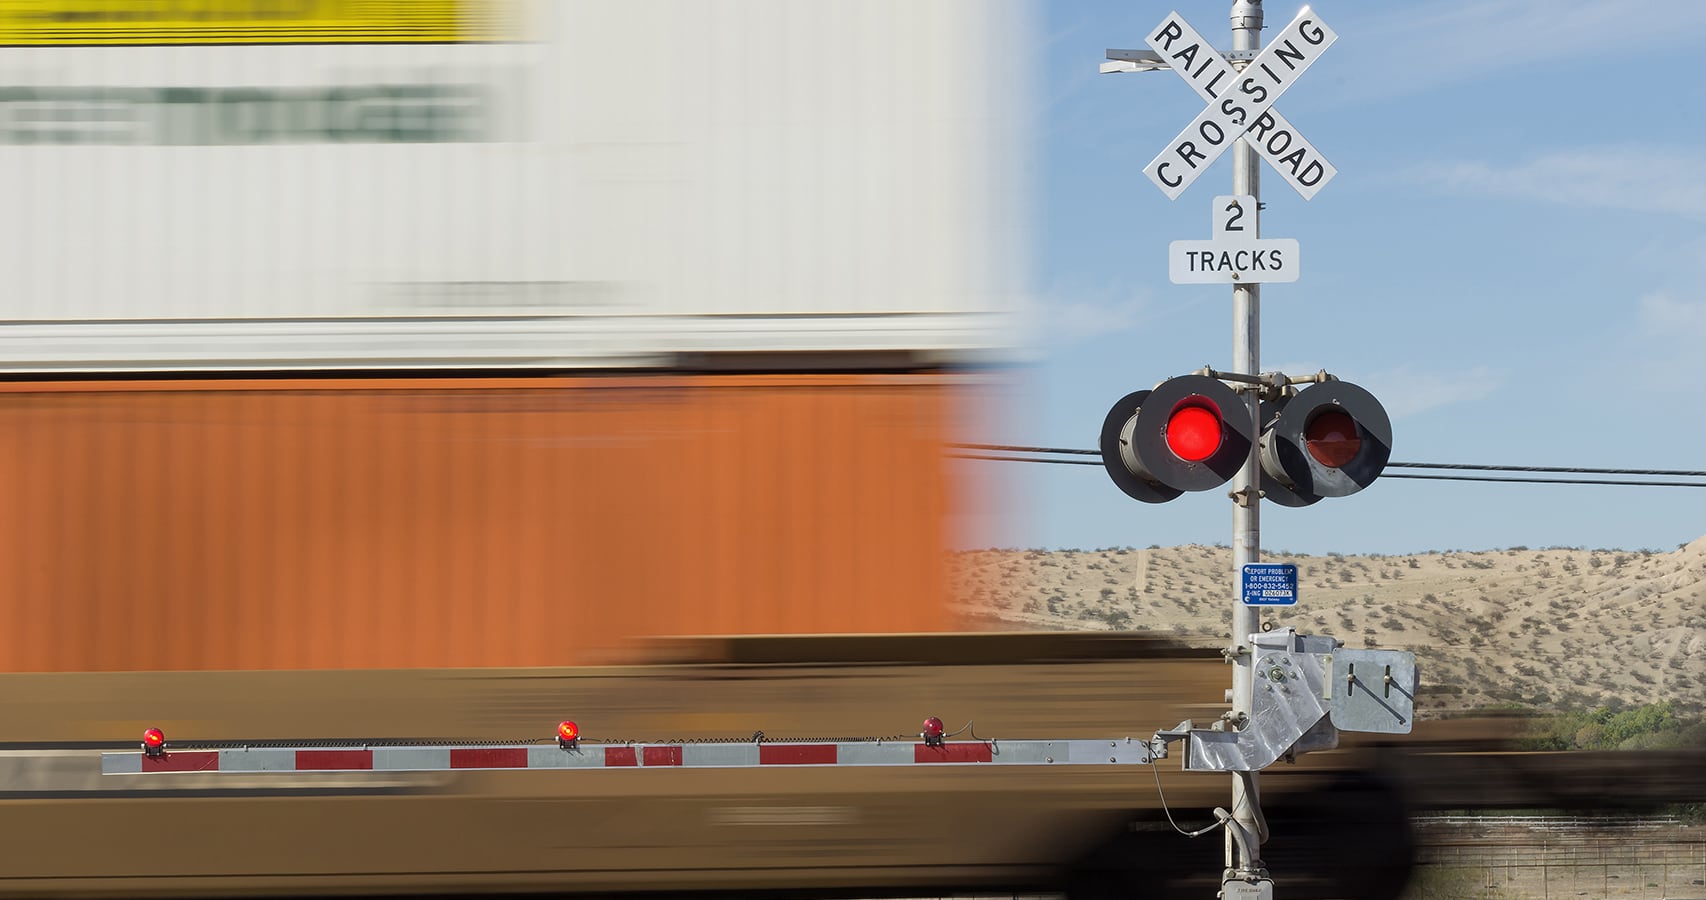 Rail crossing sign indicating two tracks with blurred building in background